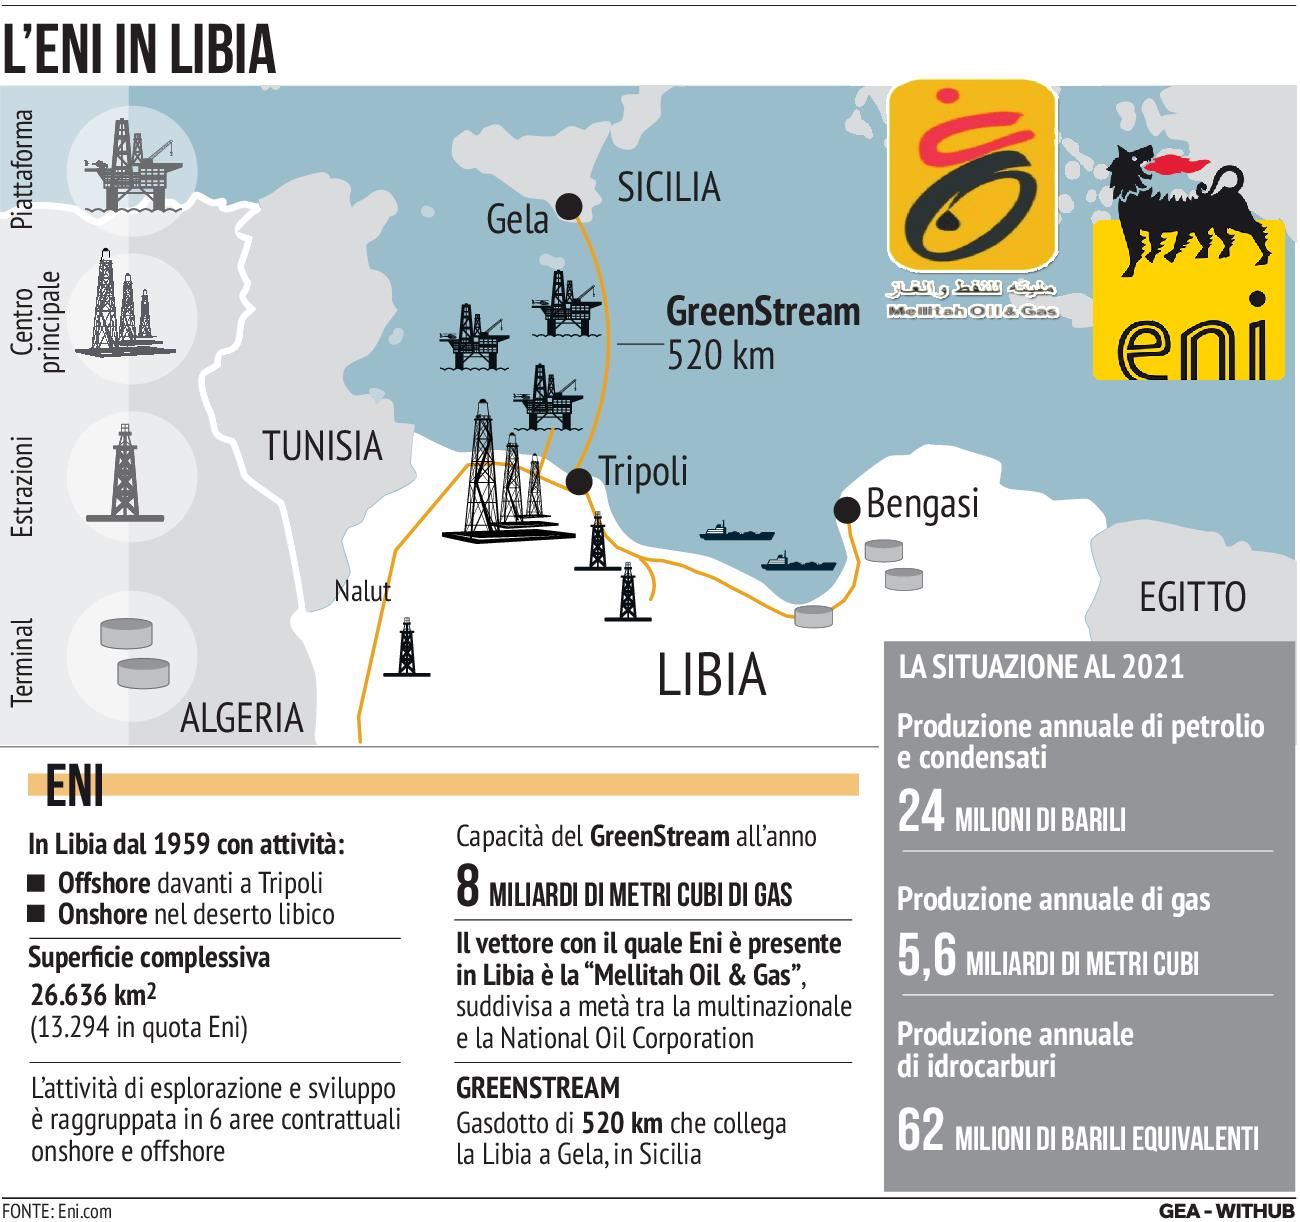 L'Eni in Libia